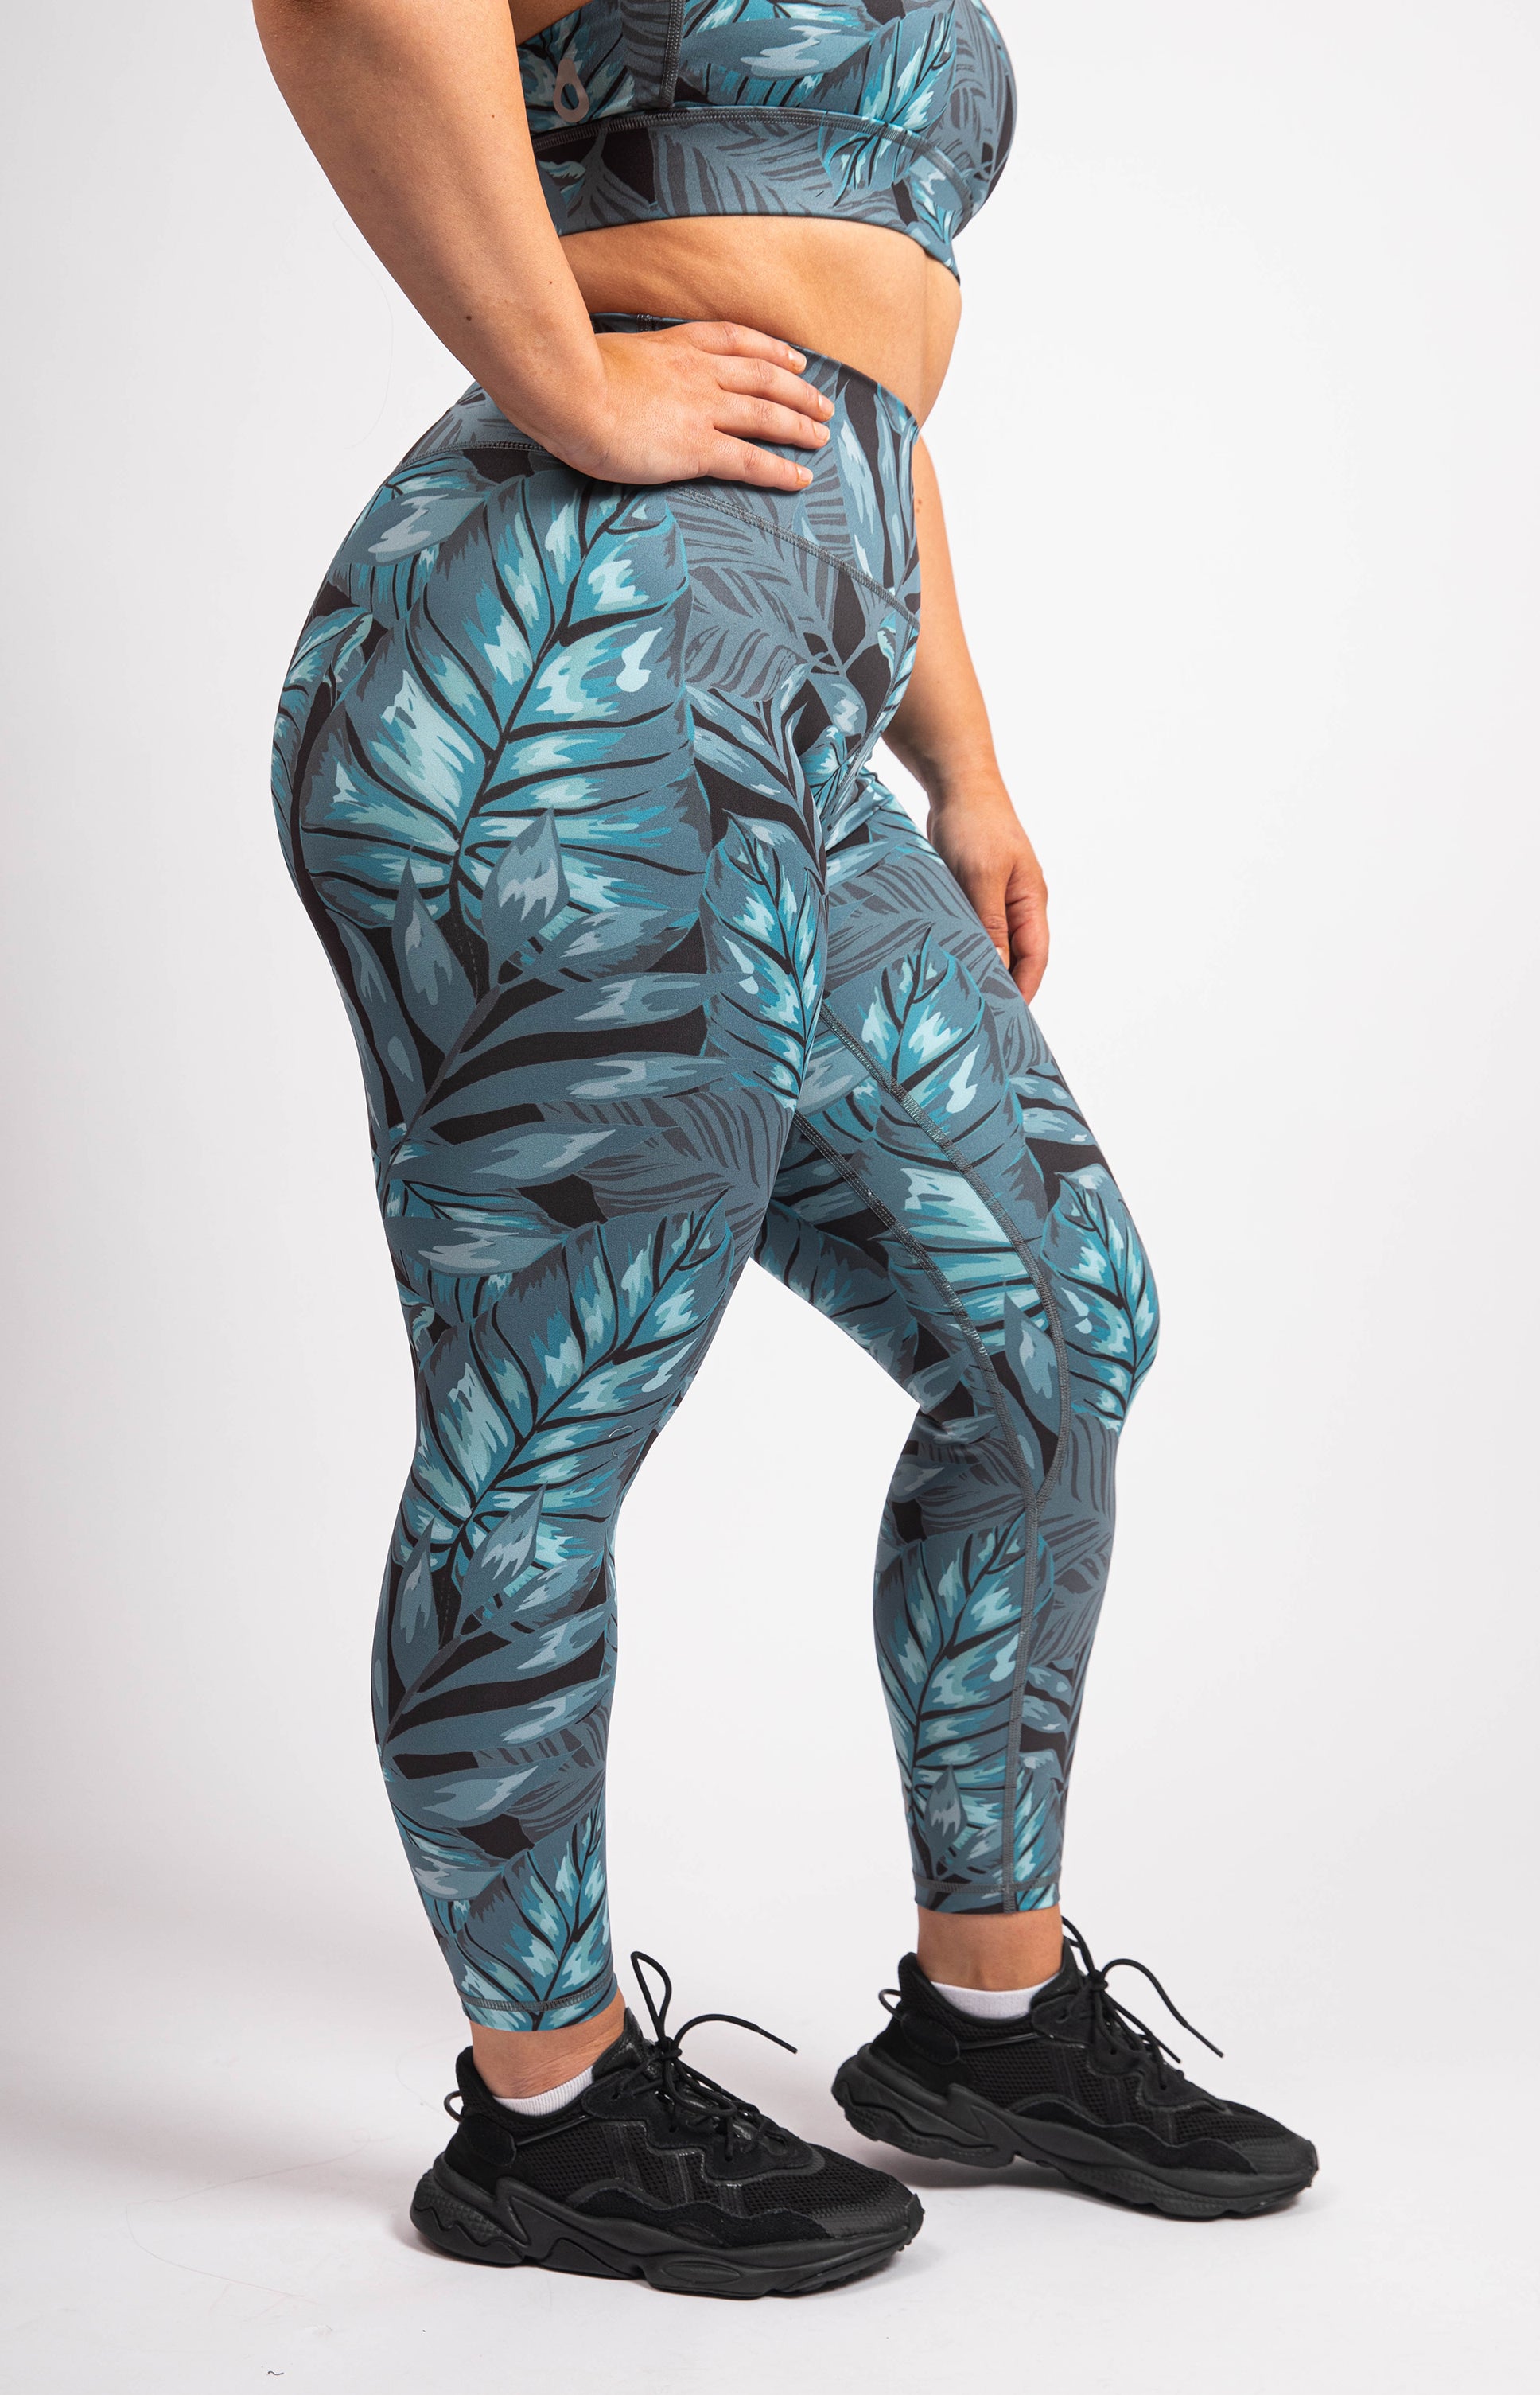 Palm leaf printed athletic leggings. Inseam approximately 28 in length. •  Flat reinforced high rise waistband • Hidden waistband pocket for keys,  phone, cash • Palm leaf print • Flat stitched seams